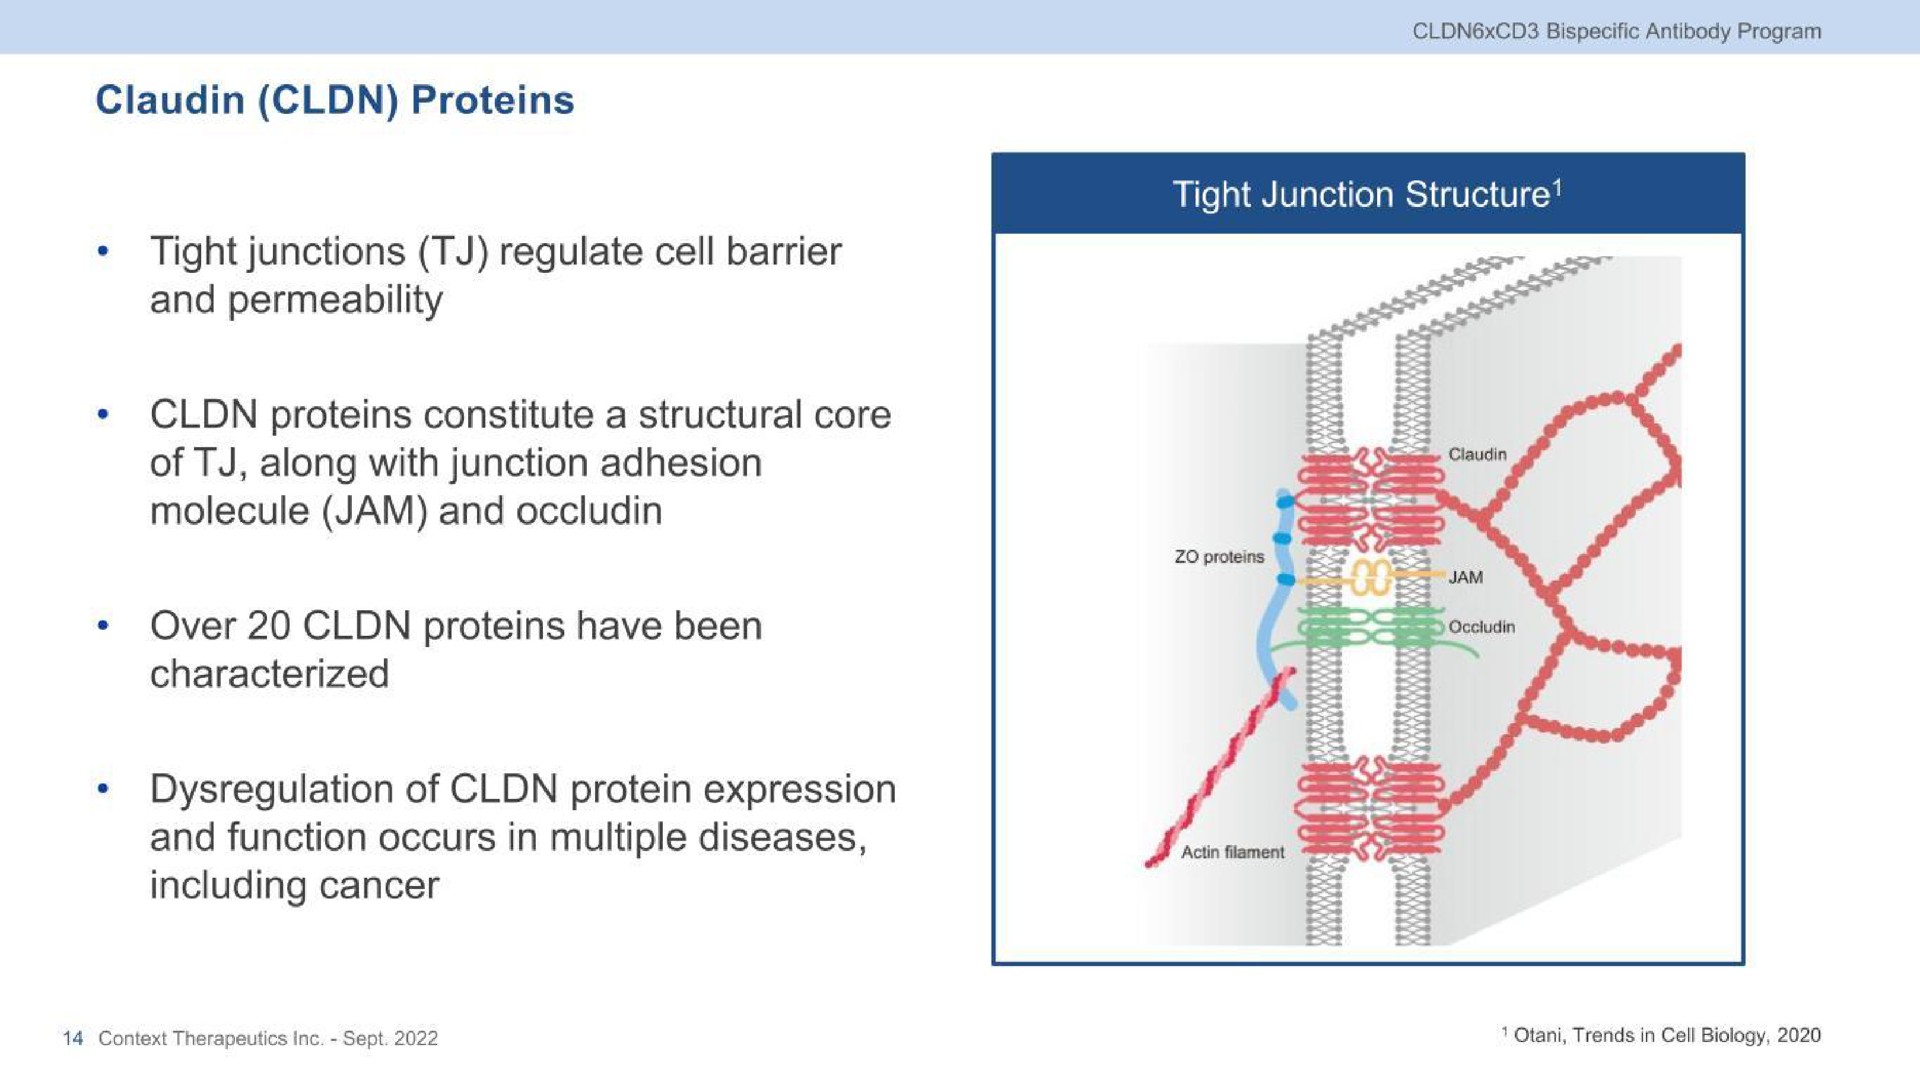 proteins tight junctions regulate cell barrier and permeability tight junction structure proteins constitute a structural core of along with junction adhesion molecule jam and over proteins have been characterized including cancer of protein expression and function occurs in multiple diseases | Context Therapeutics